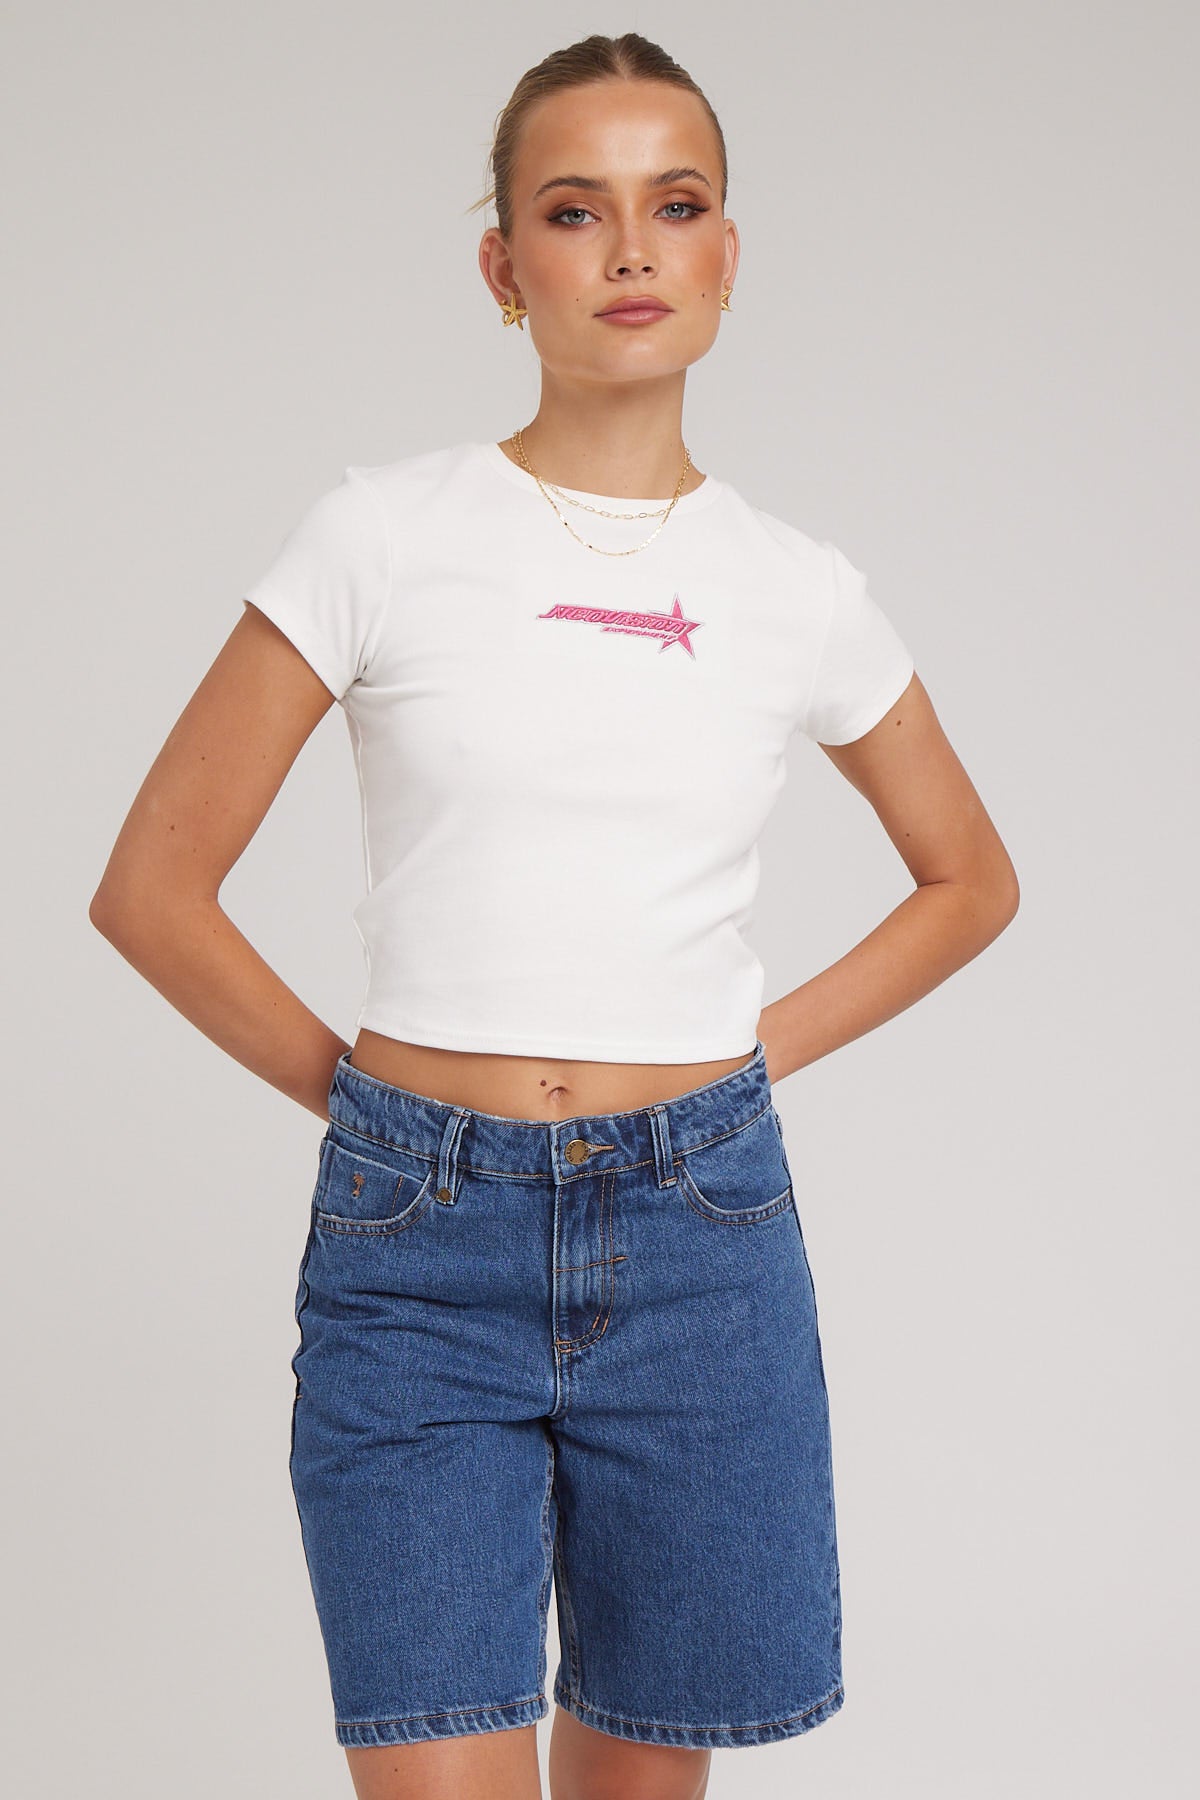 Neovision Xperiement Cropped Tee White